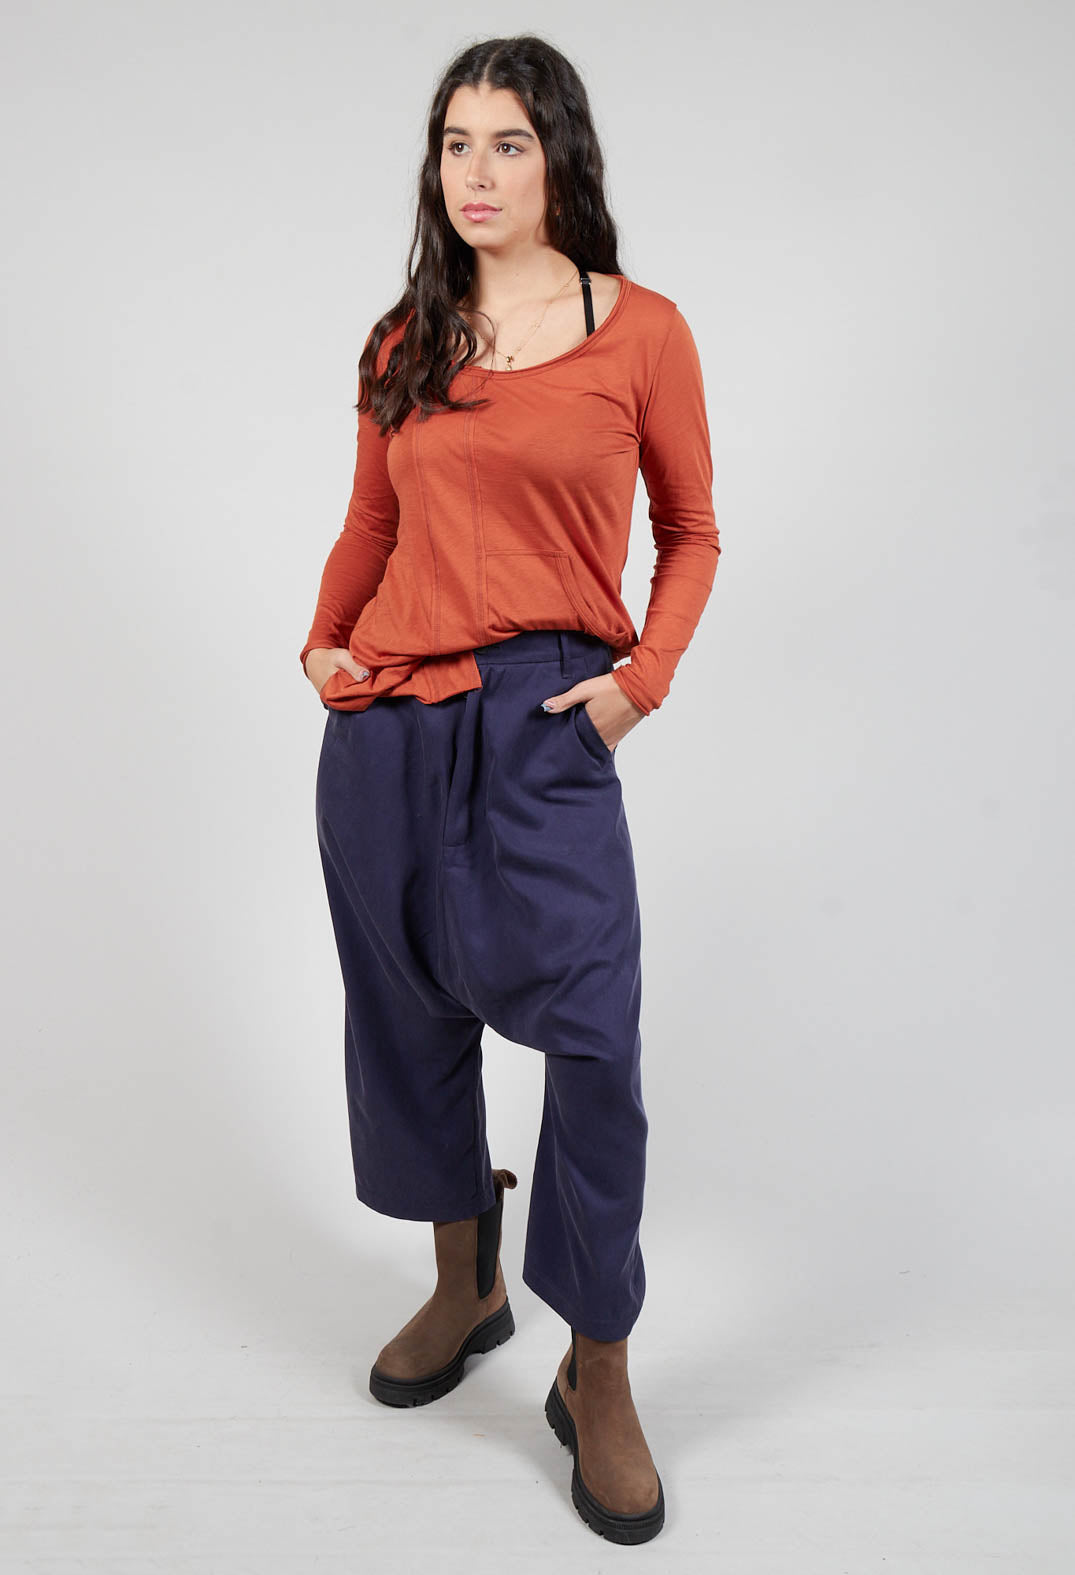 Blueberry Chef Pant | MEALS Clothing – meals